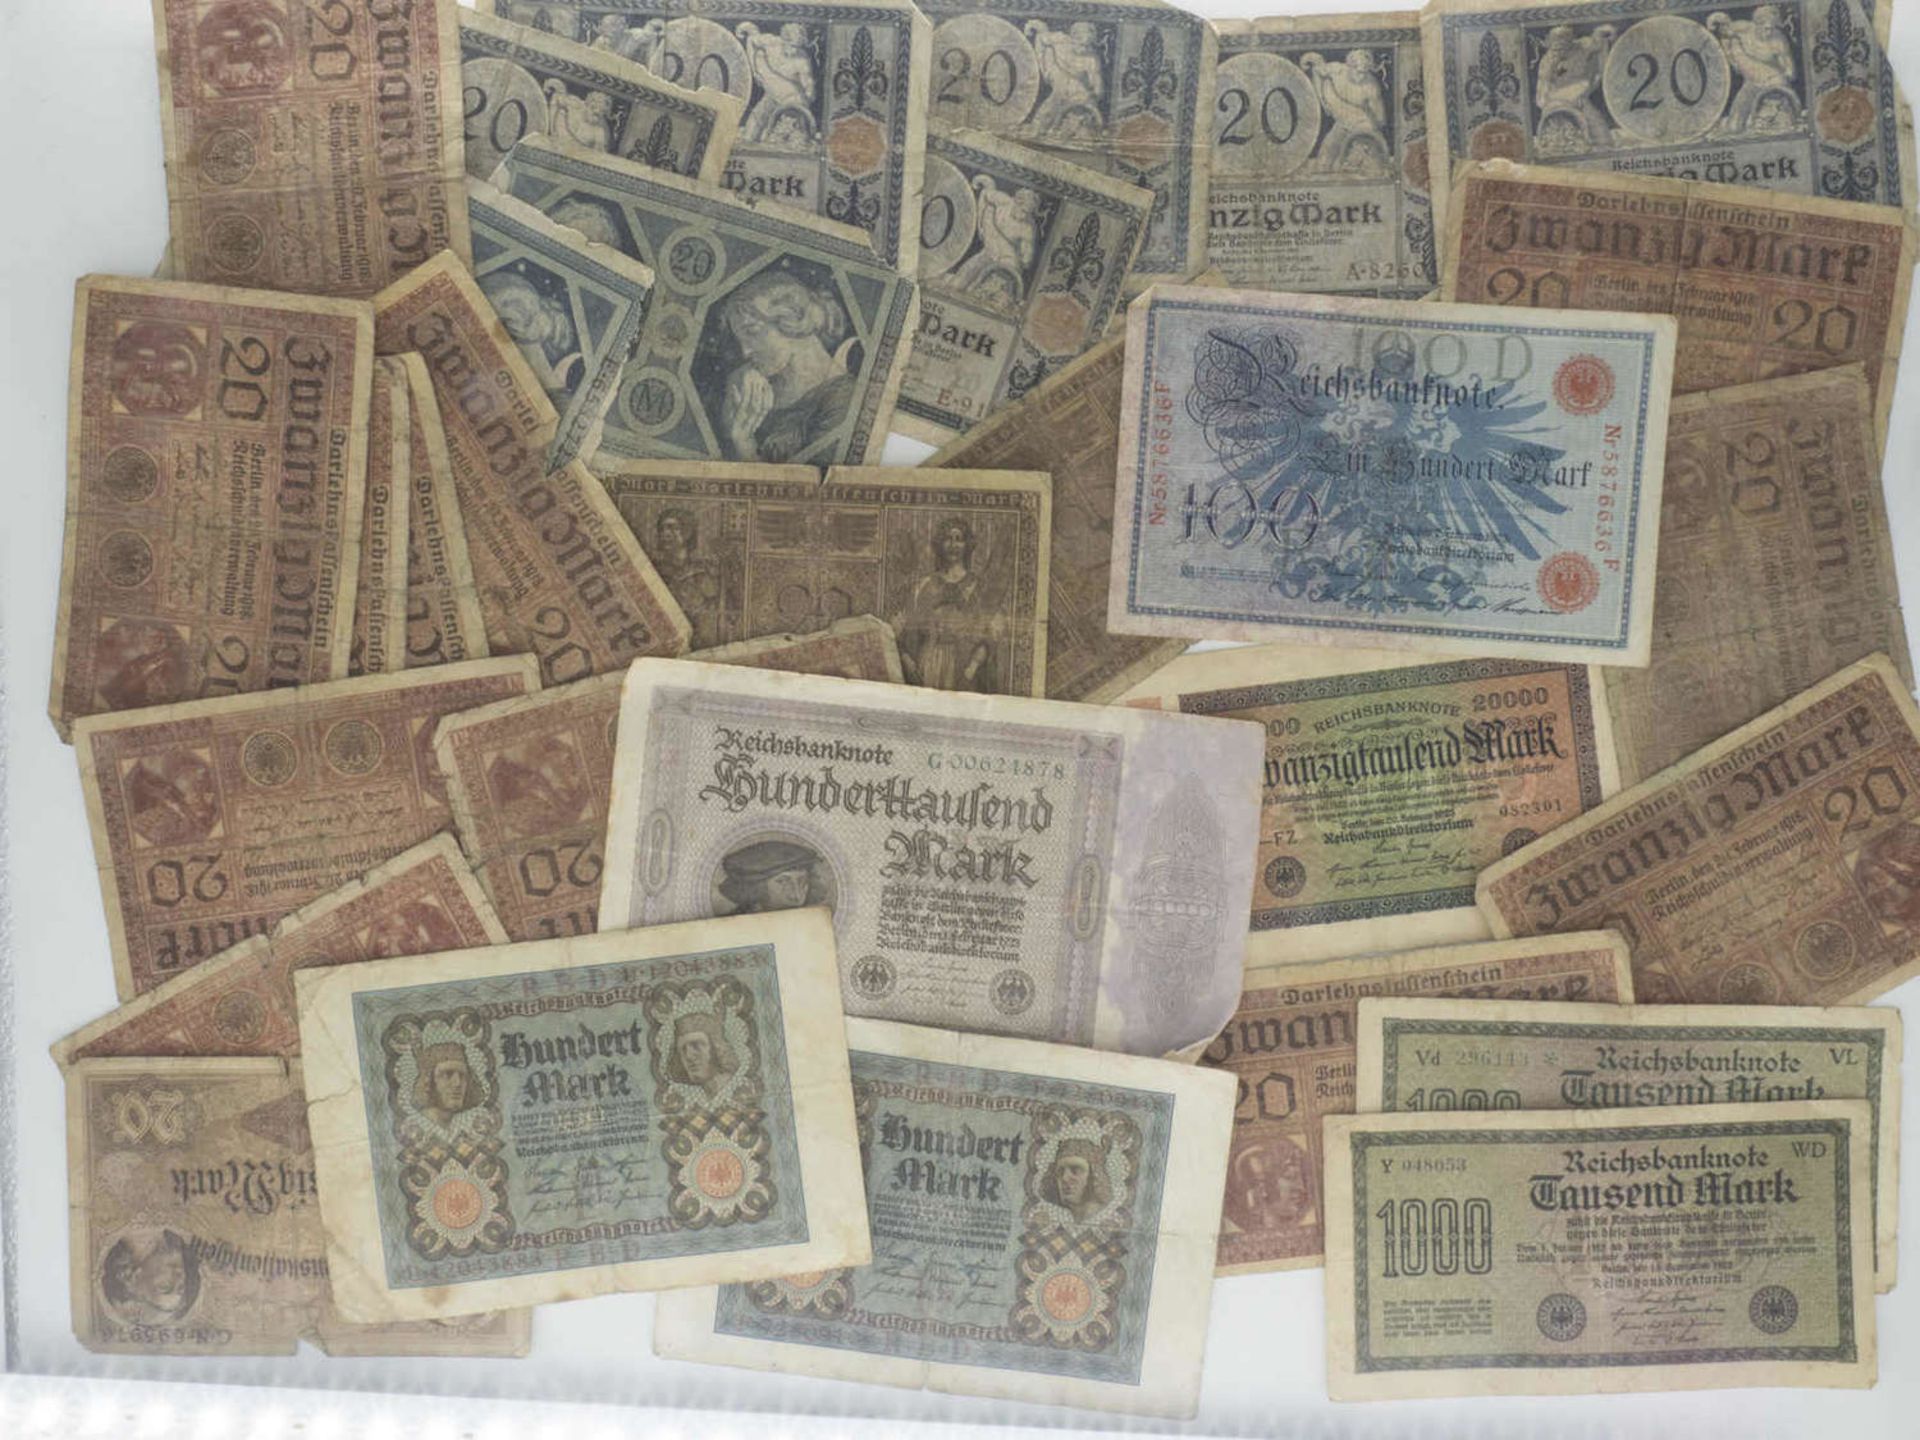 Germany, lot of banknotes / loan notes, very bad condition. Please visit.